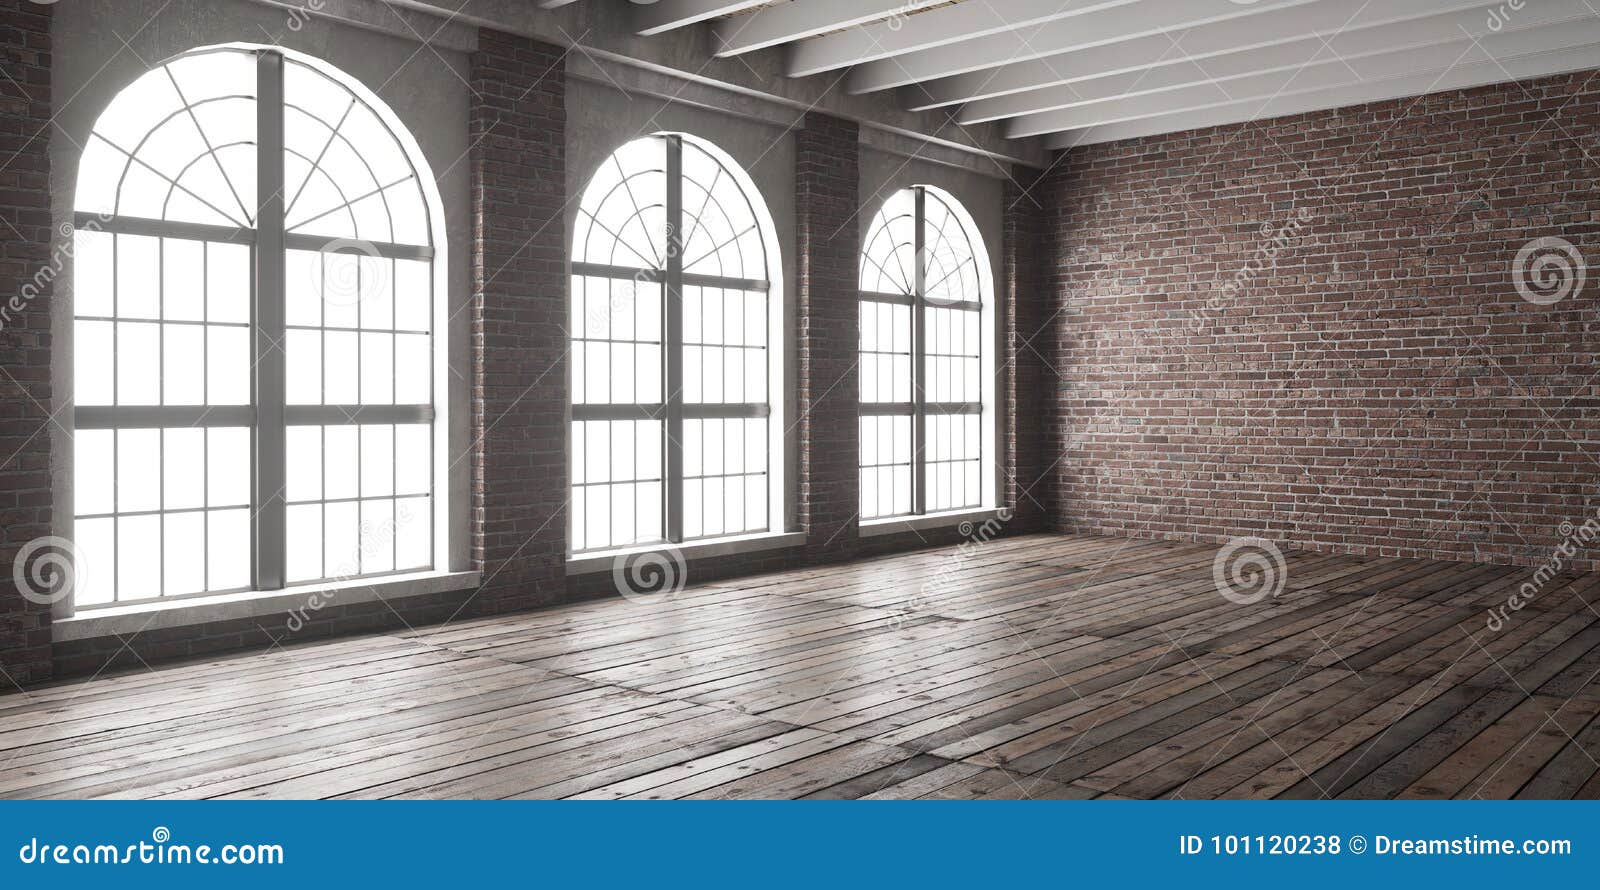 large empty room in loft style